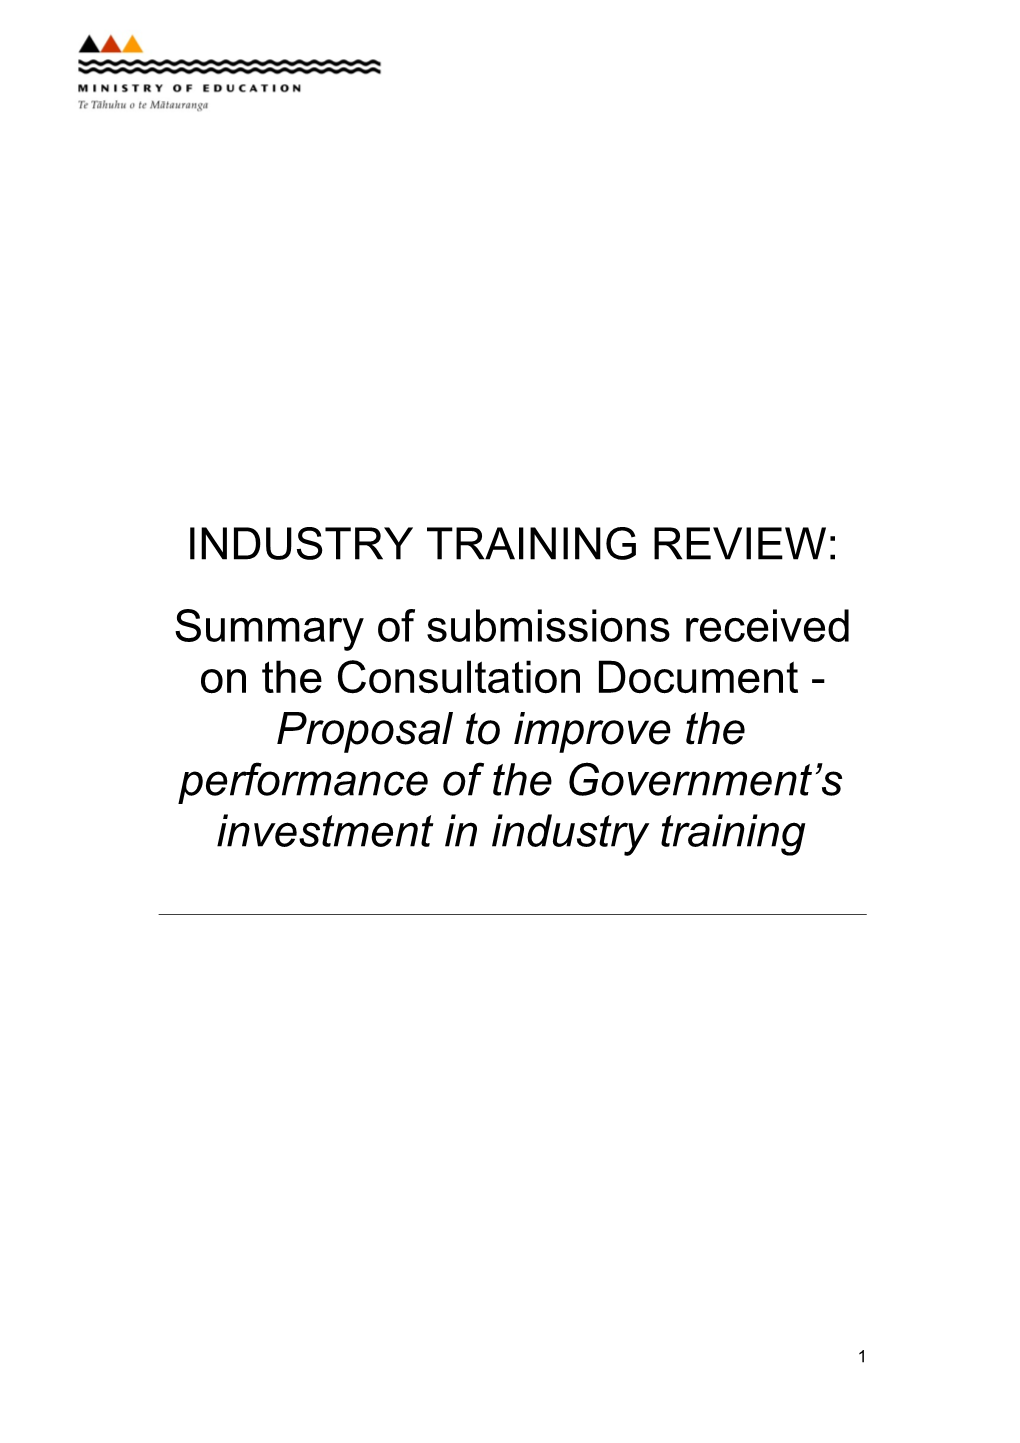 Proposal To Improve The Performance Of The Government’S Investment In Industry Training